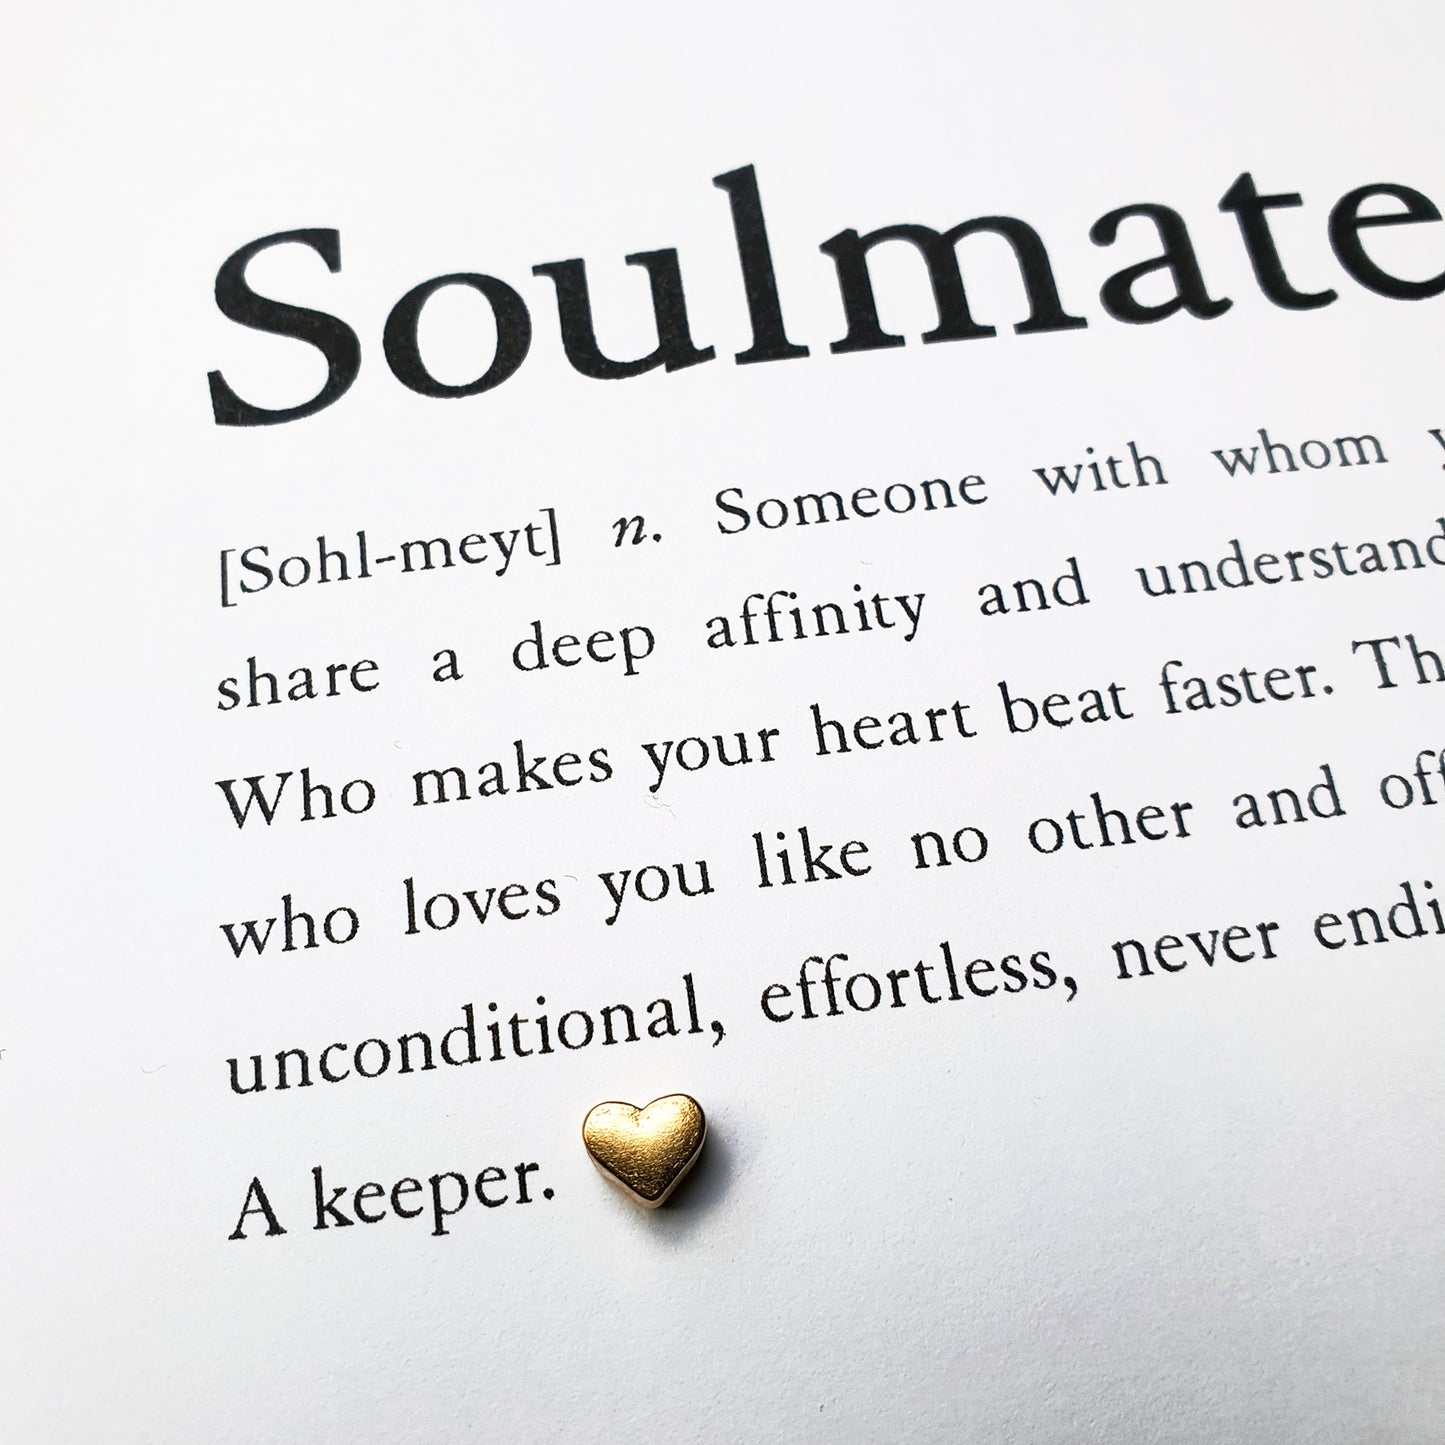 Soulmate definition card